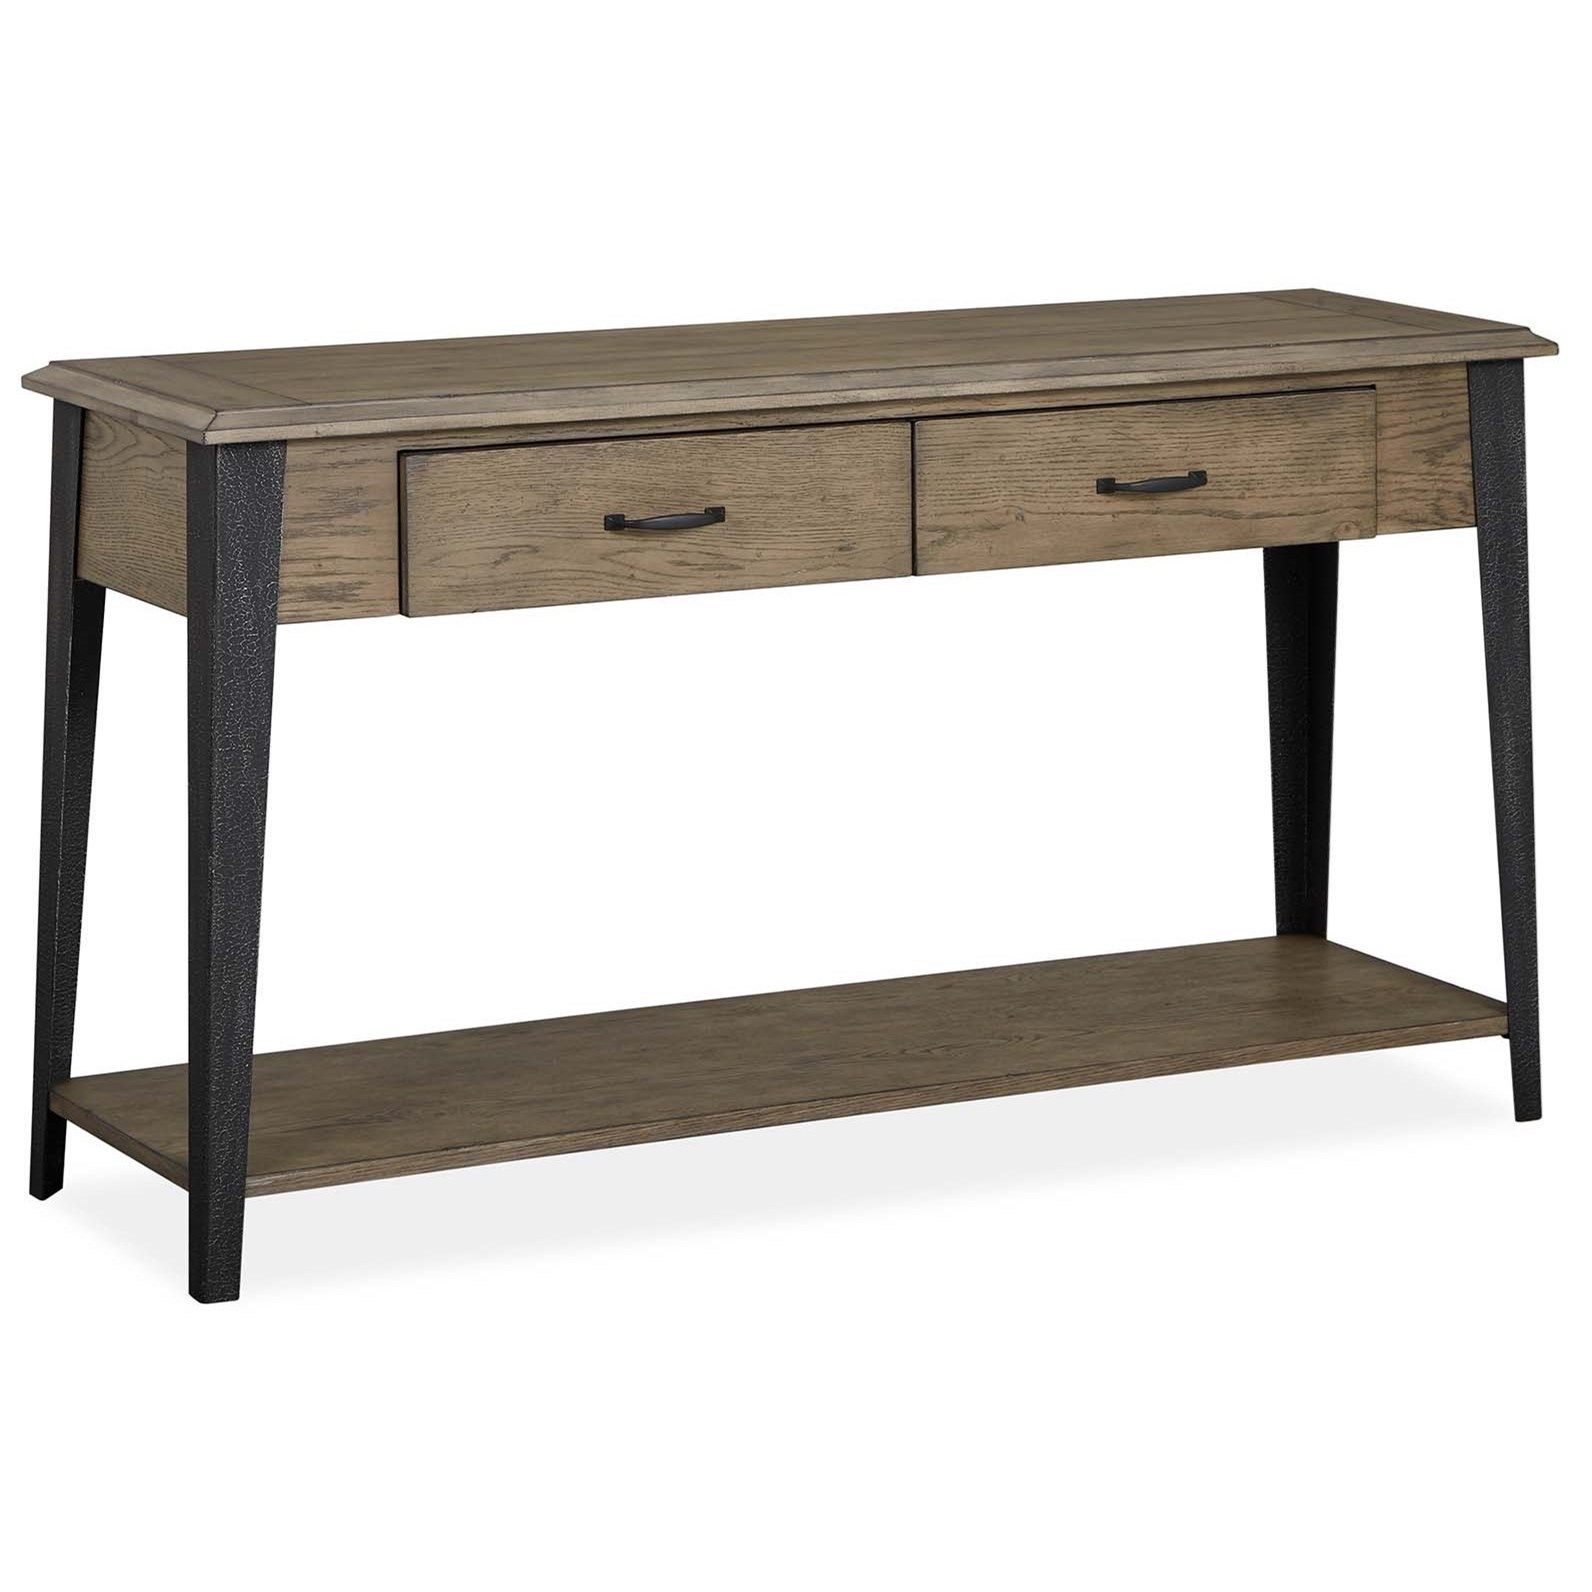 Magnussen Home Butler Industrial Rectangular Sofa Table Intended For Bronze Metal Rectangular Console Tables (View 15 of 20)